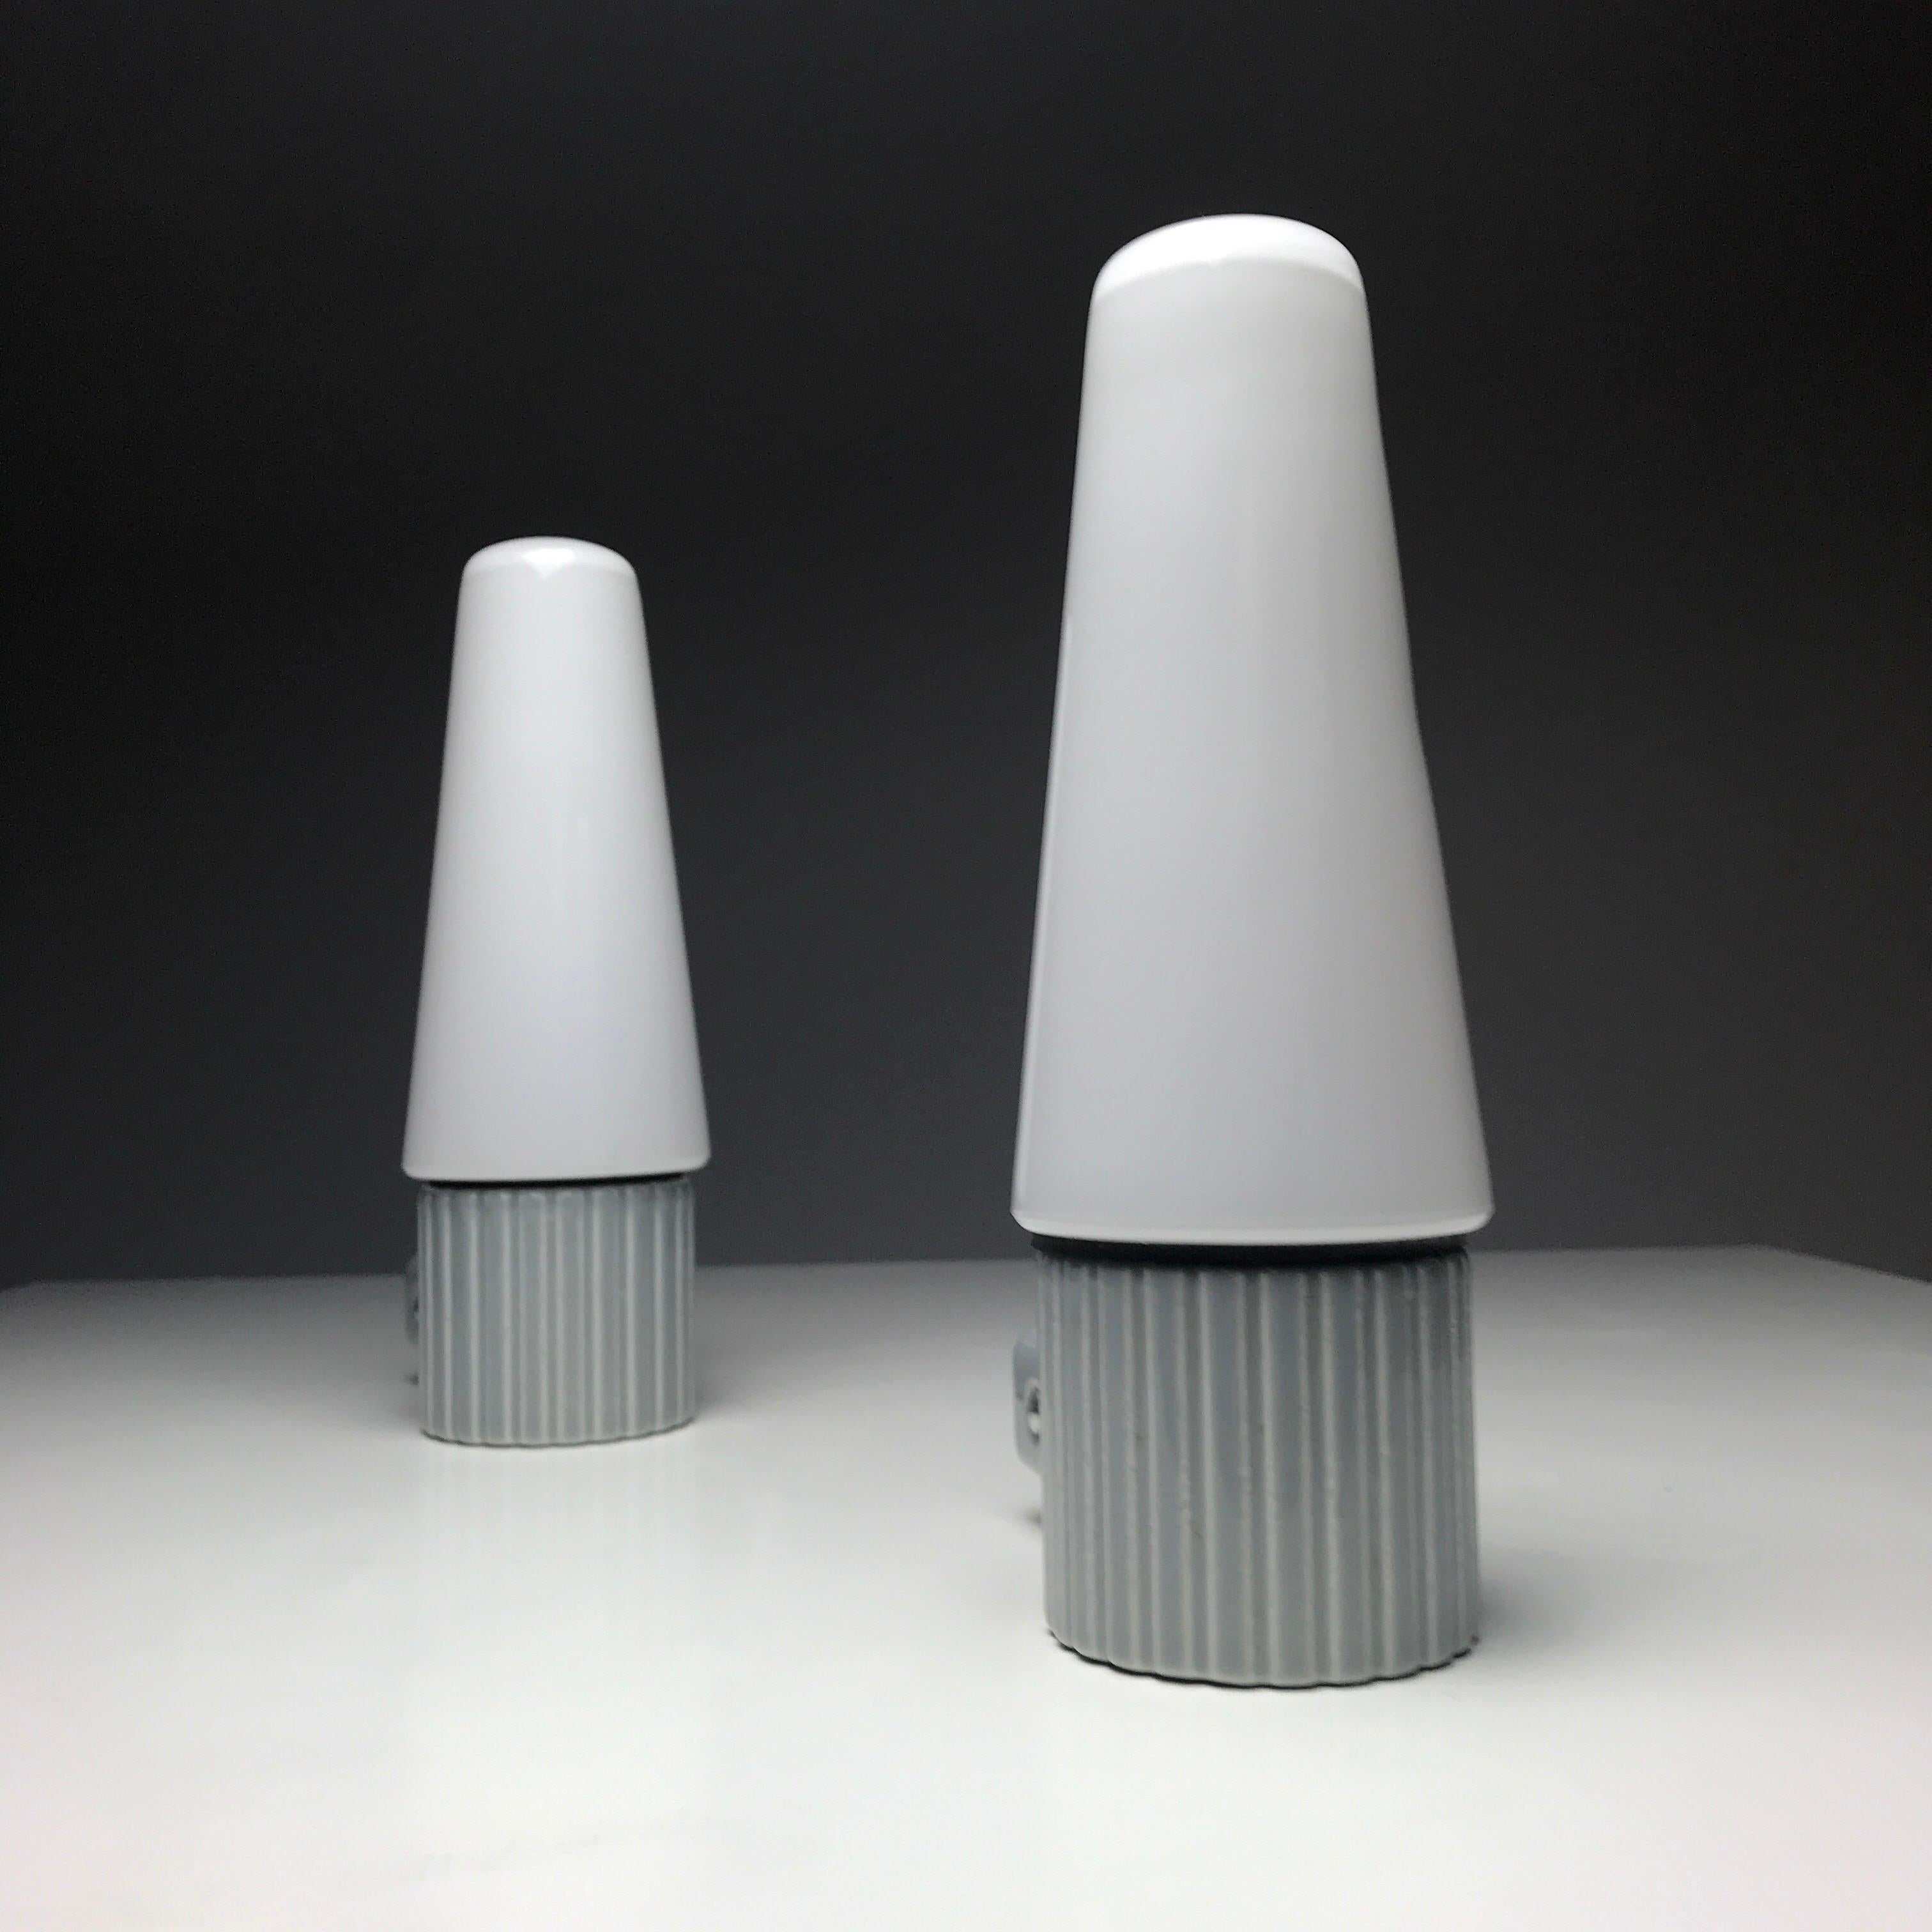 Mid-20th Century Porcelain and Opaline Glass Wall Lights by S. Bernadotte for IFÖ, Sweden 1960s